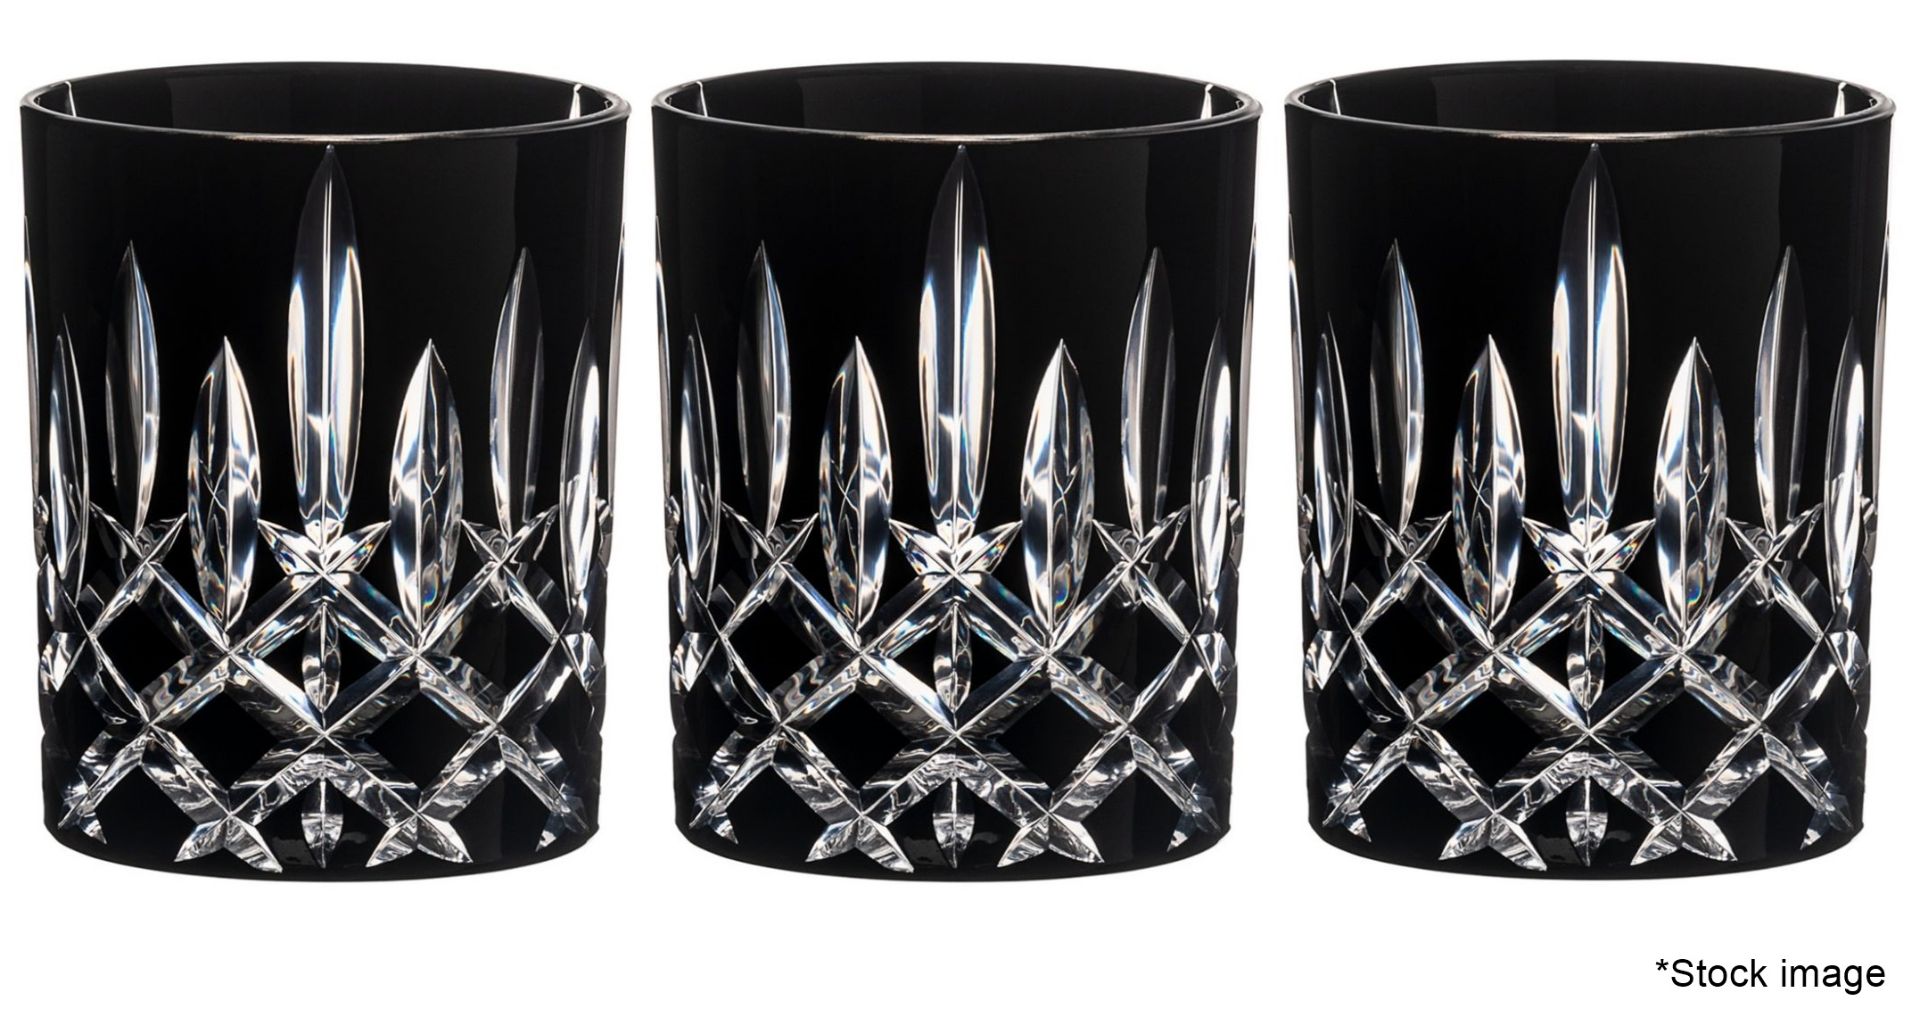 3 x RIEDEL 'Laudon' Luxury Crystal Whisky Glasses In Black (295ml) - Total RRP £225.00